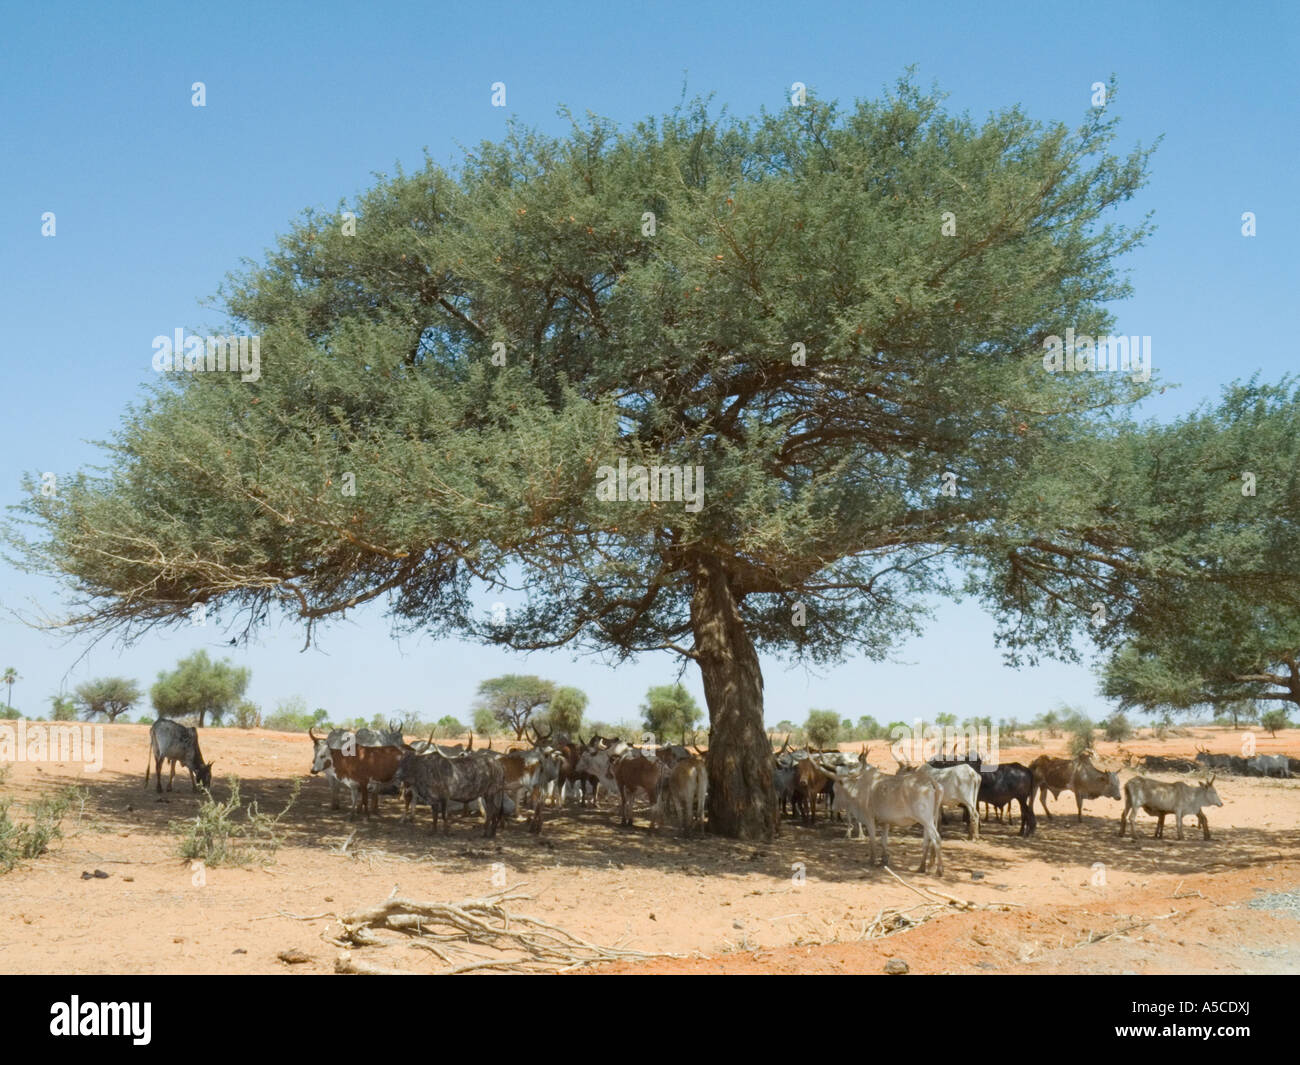 cattle shelter in shade of tree.  Mali, West Africa Stock Photo